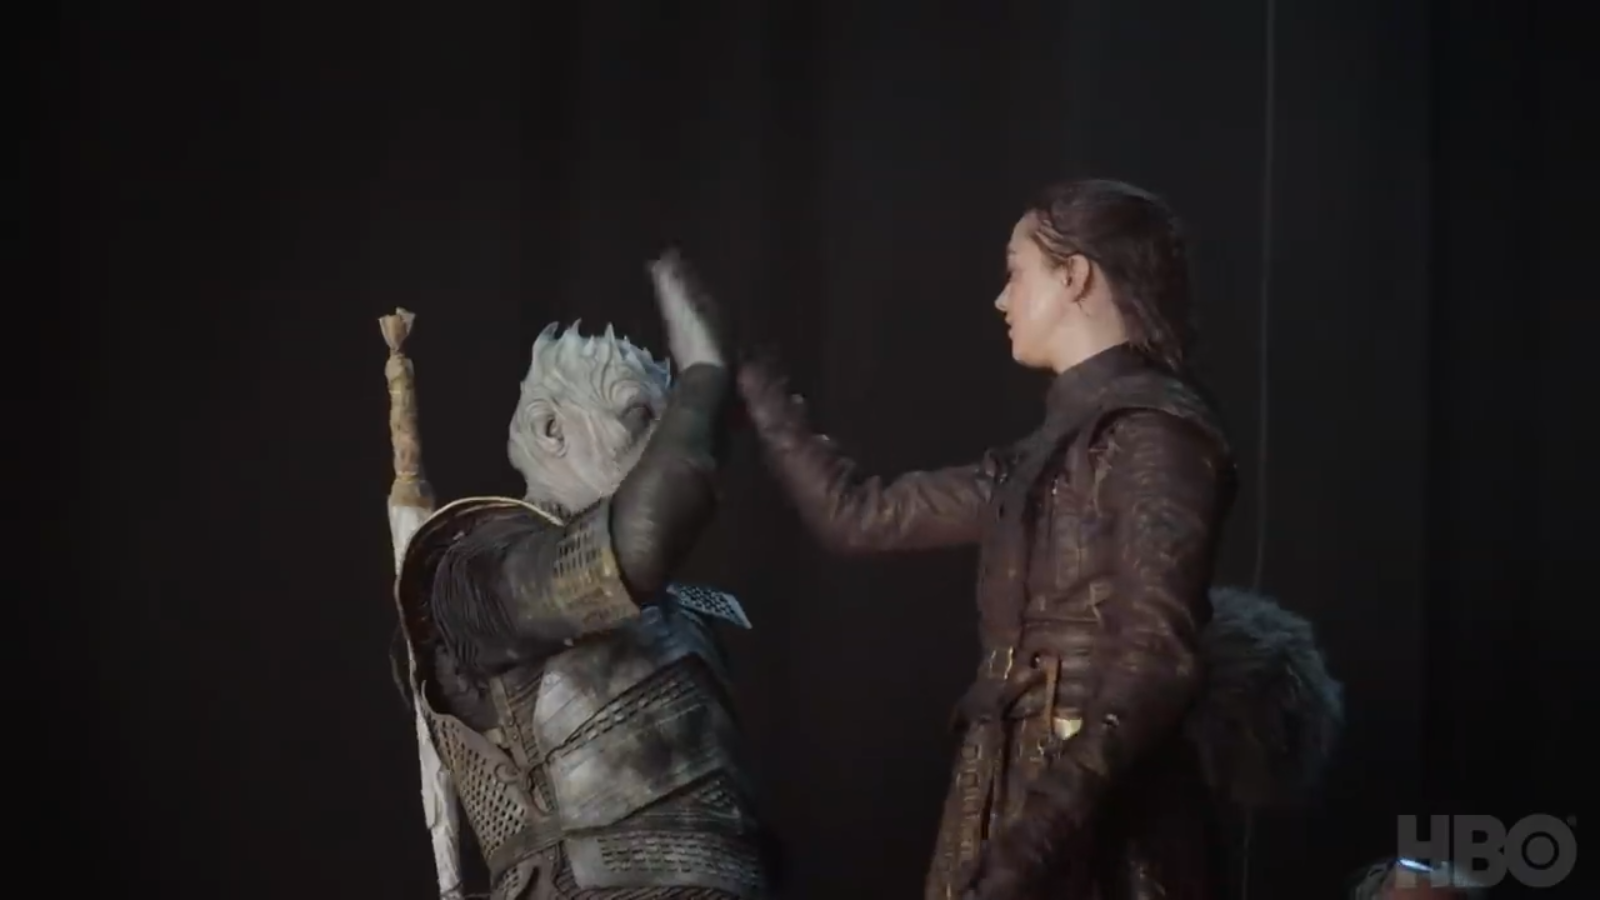 High five! - Game of Thrones, Spoiler, Game of Thrones season 8, King of the night, Arya stark, Photos from filming